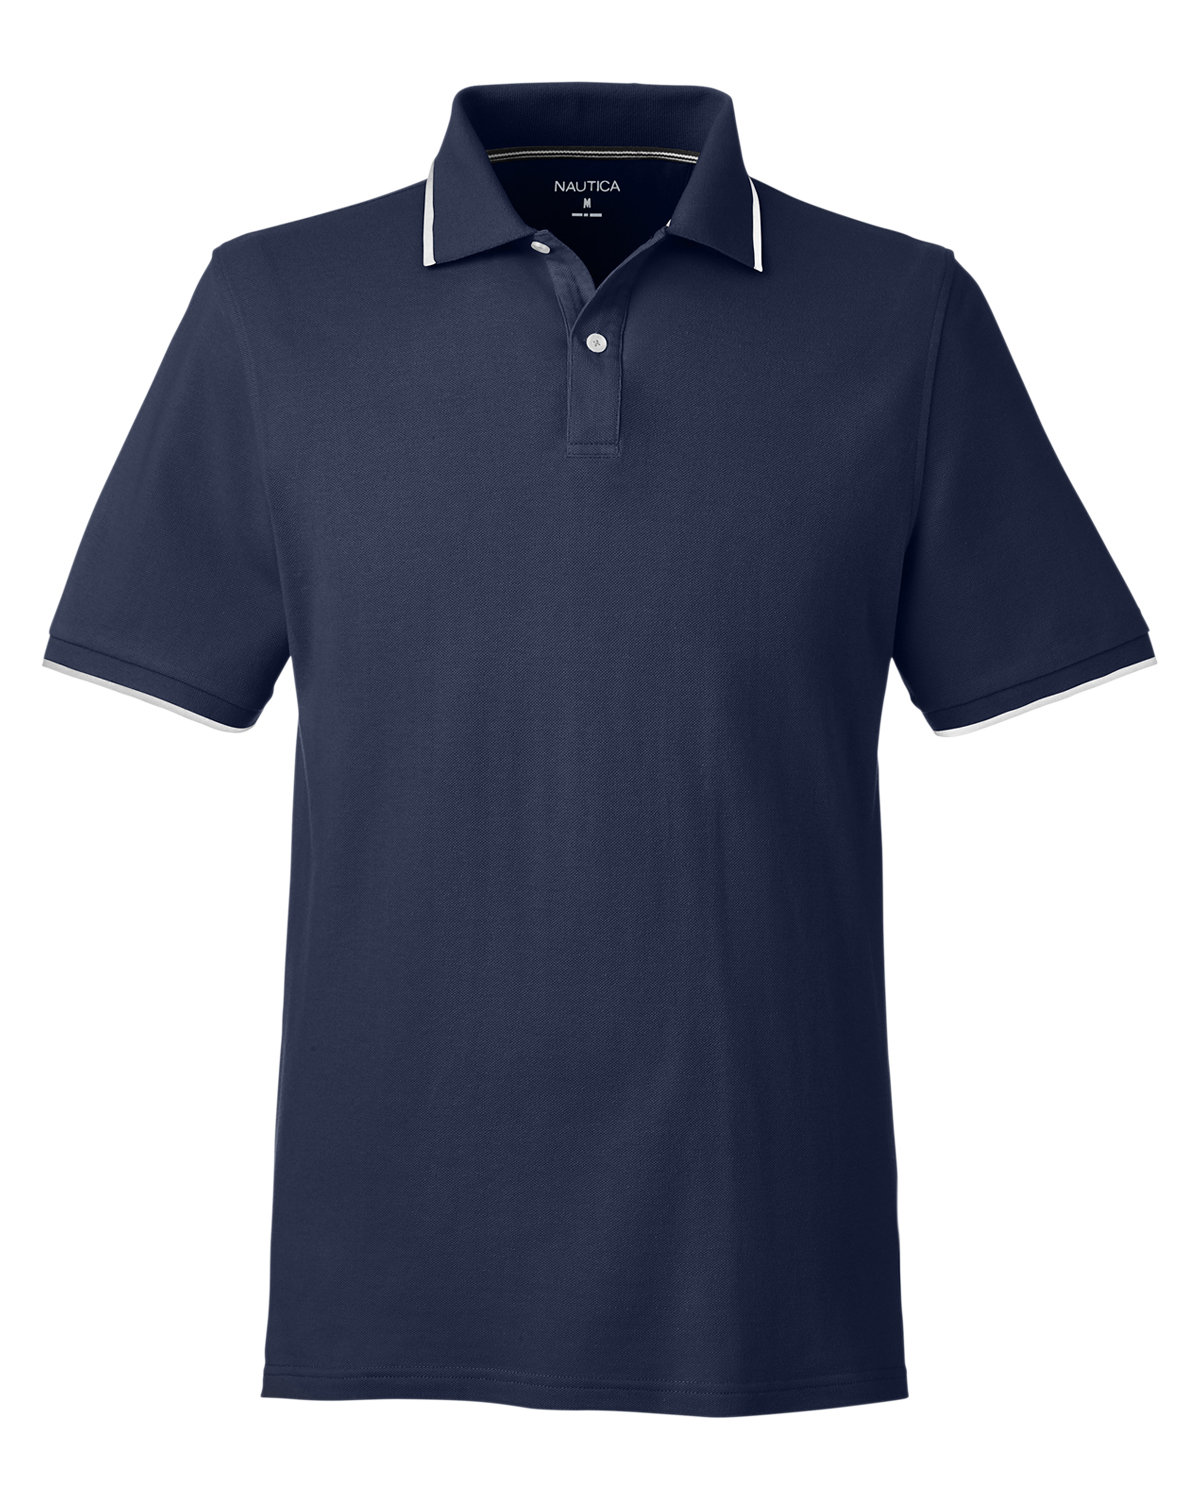 click to view NAUTICA NAVY/ WH